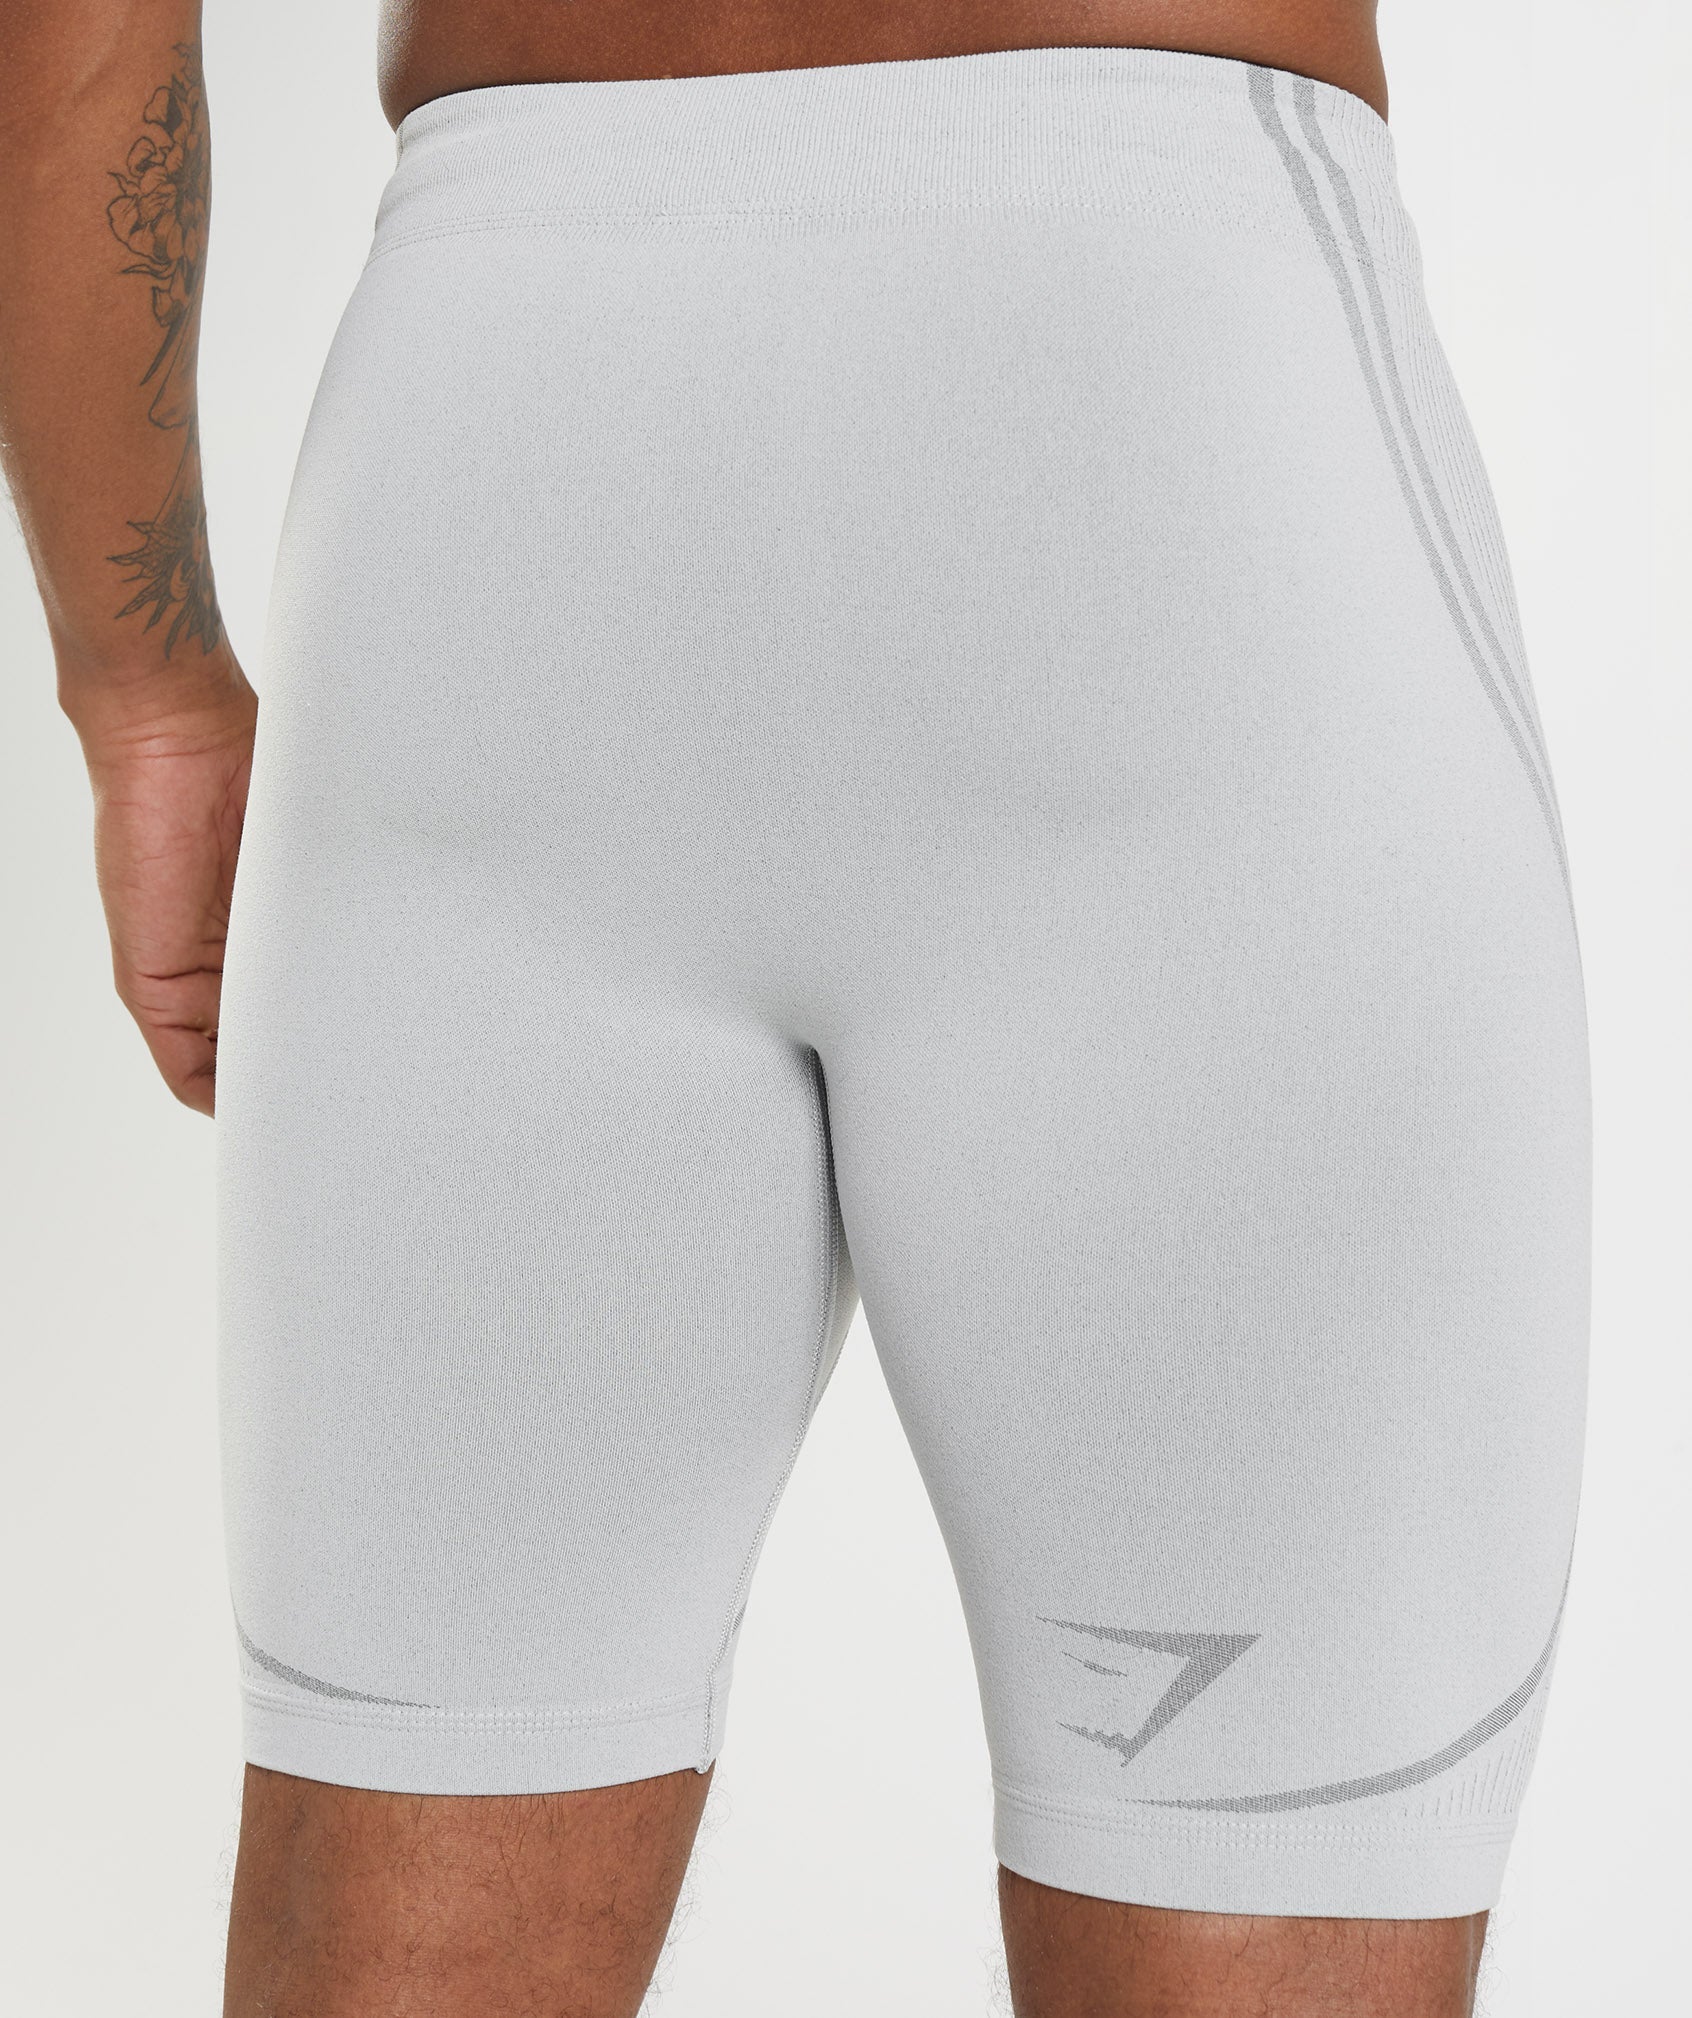 315 Seamless 1/2 Shorts in Light Grey/Charcoal Grey - view 5